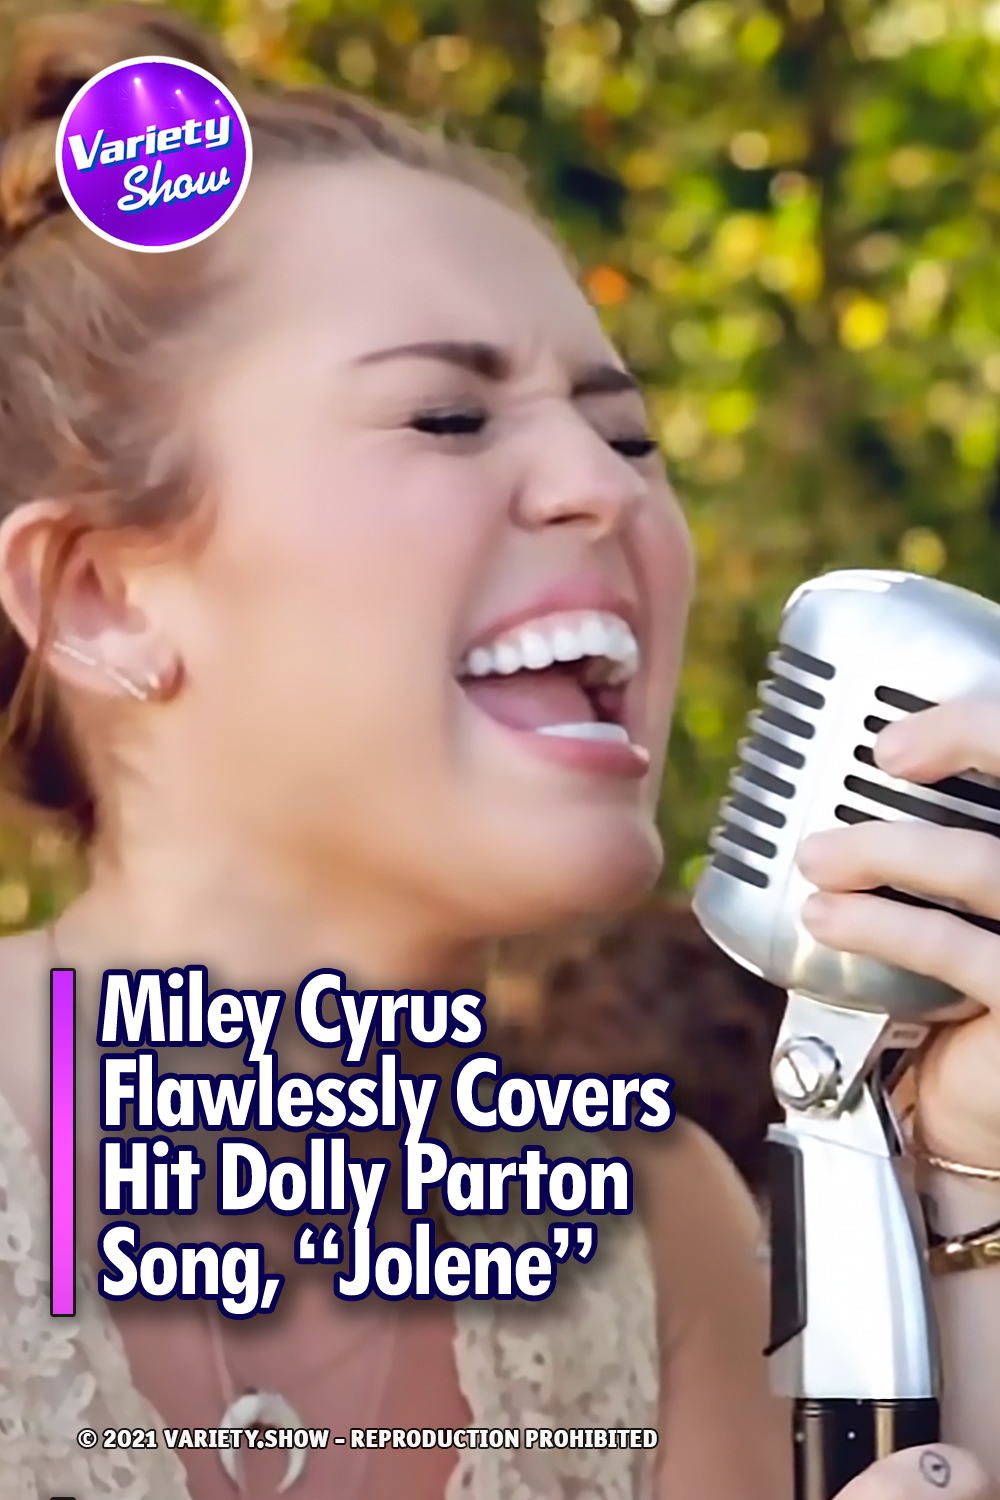 Miley Cyrus Flawlessly Covers Hit Dolly Parton Song, “Jolene”